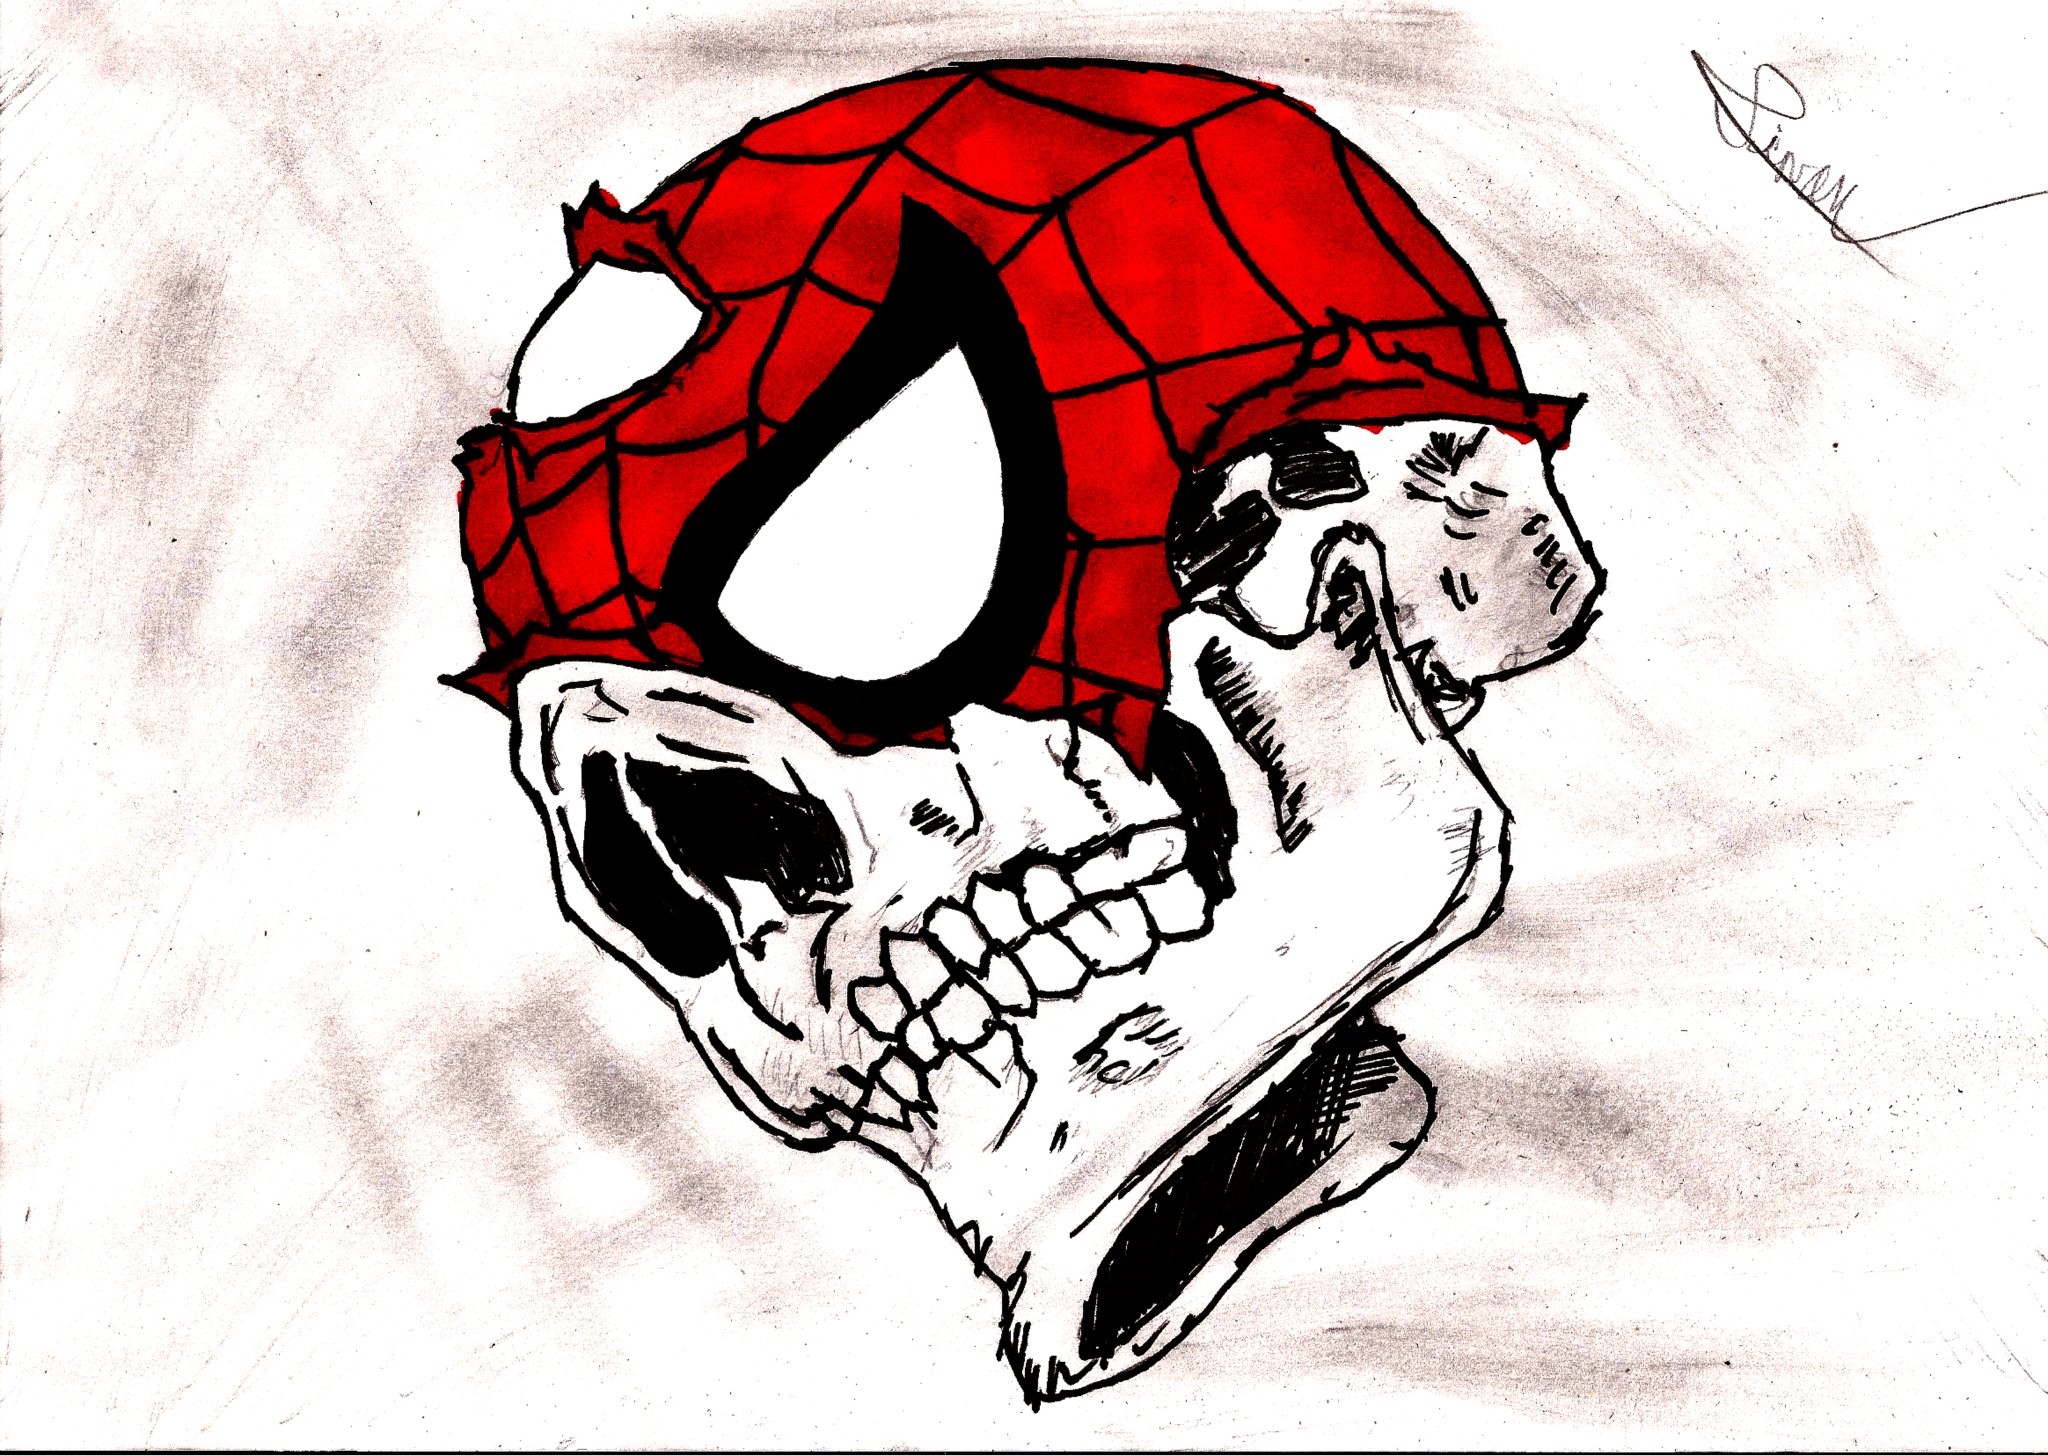 General 2048x1455 skull Spider-Man death drawing white white background red